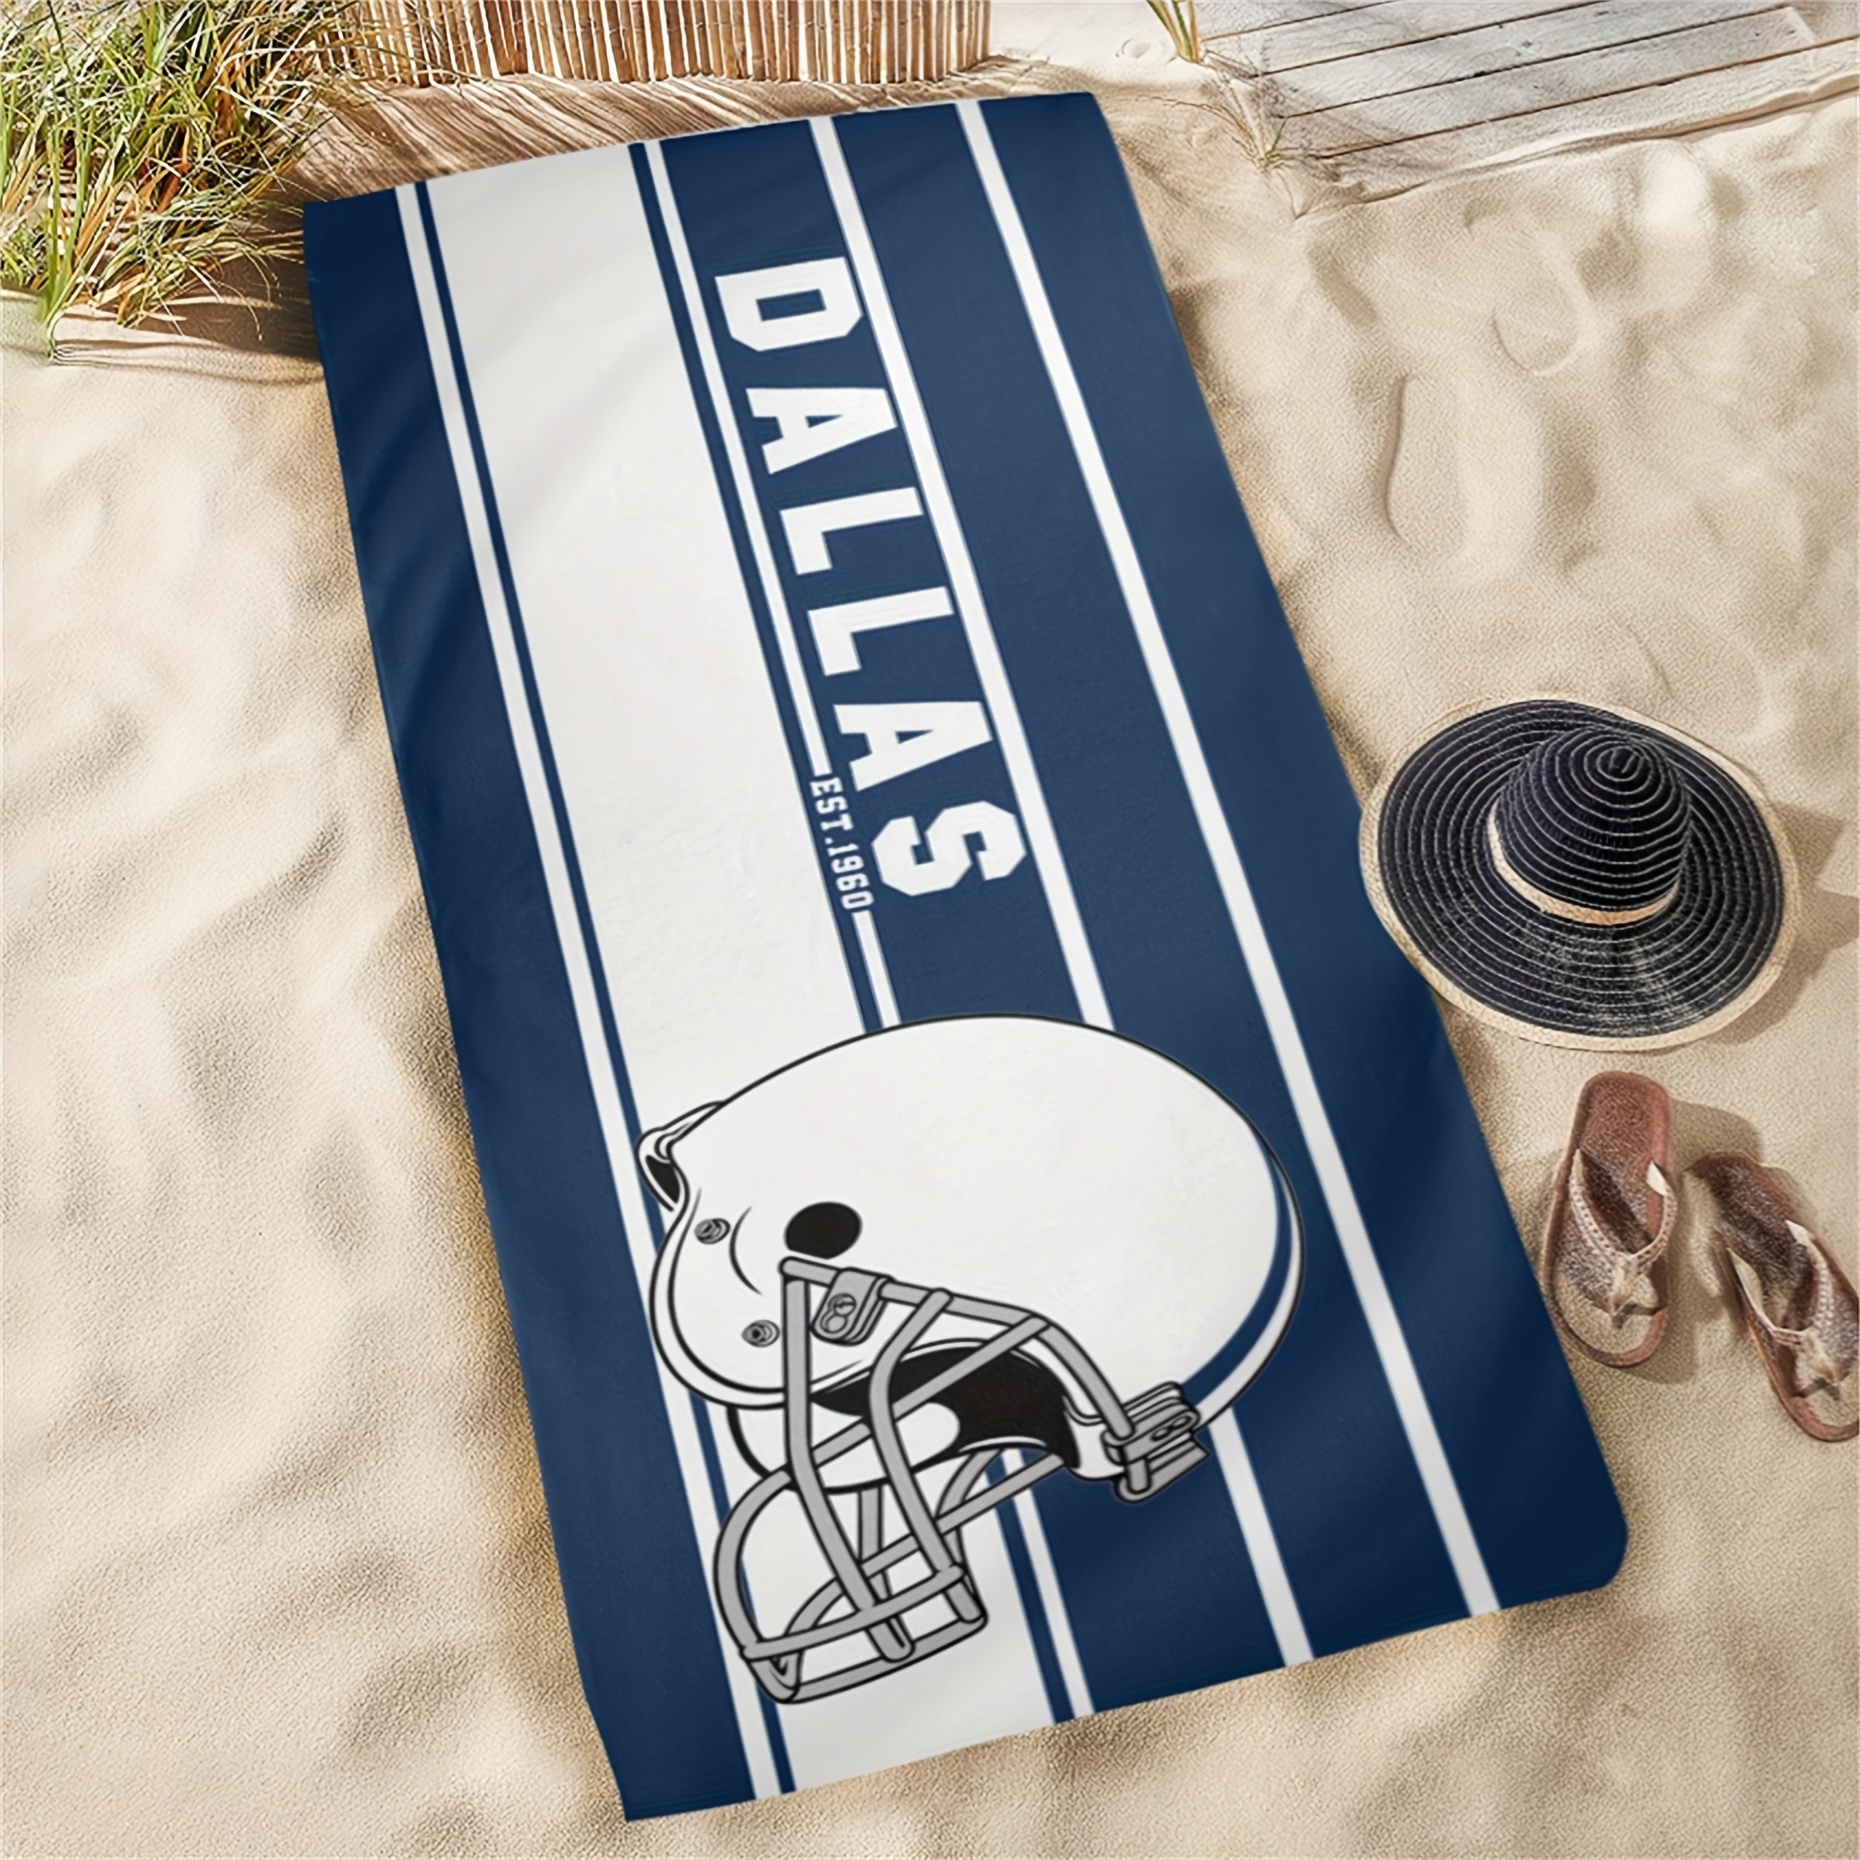 

Team Towel Oversized Beach Towel, 31*71 (in) Beach Quick-dry Bath Towel, Team Theme Gift Beach Towel, The Best Gift For Friends, Soft And Comfortable Without Lint